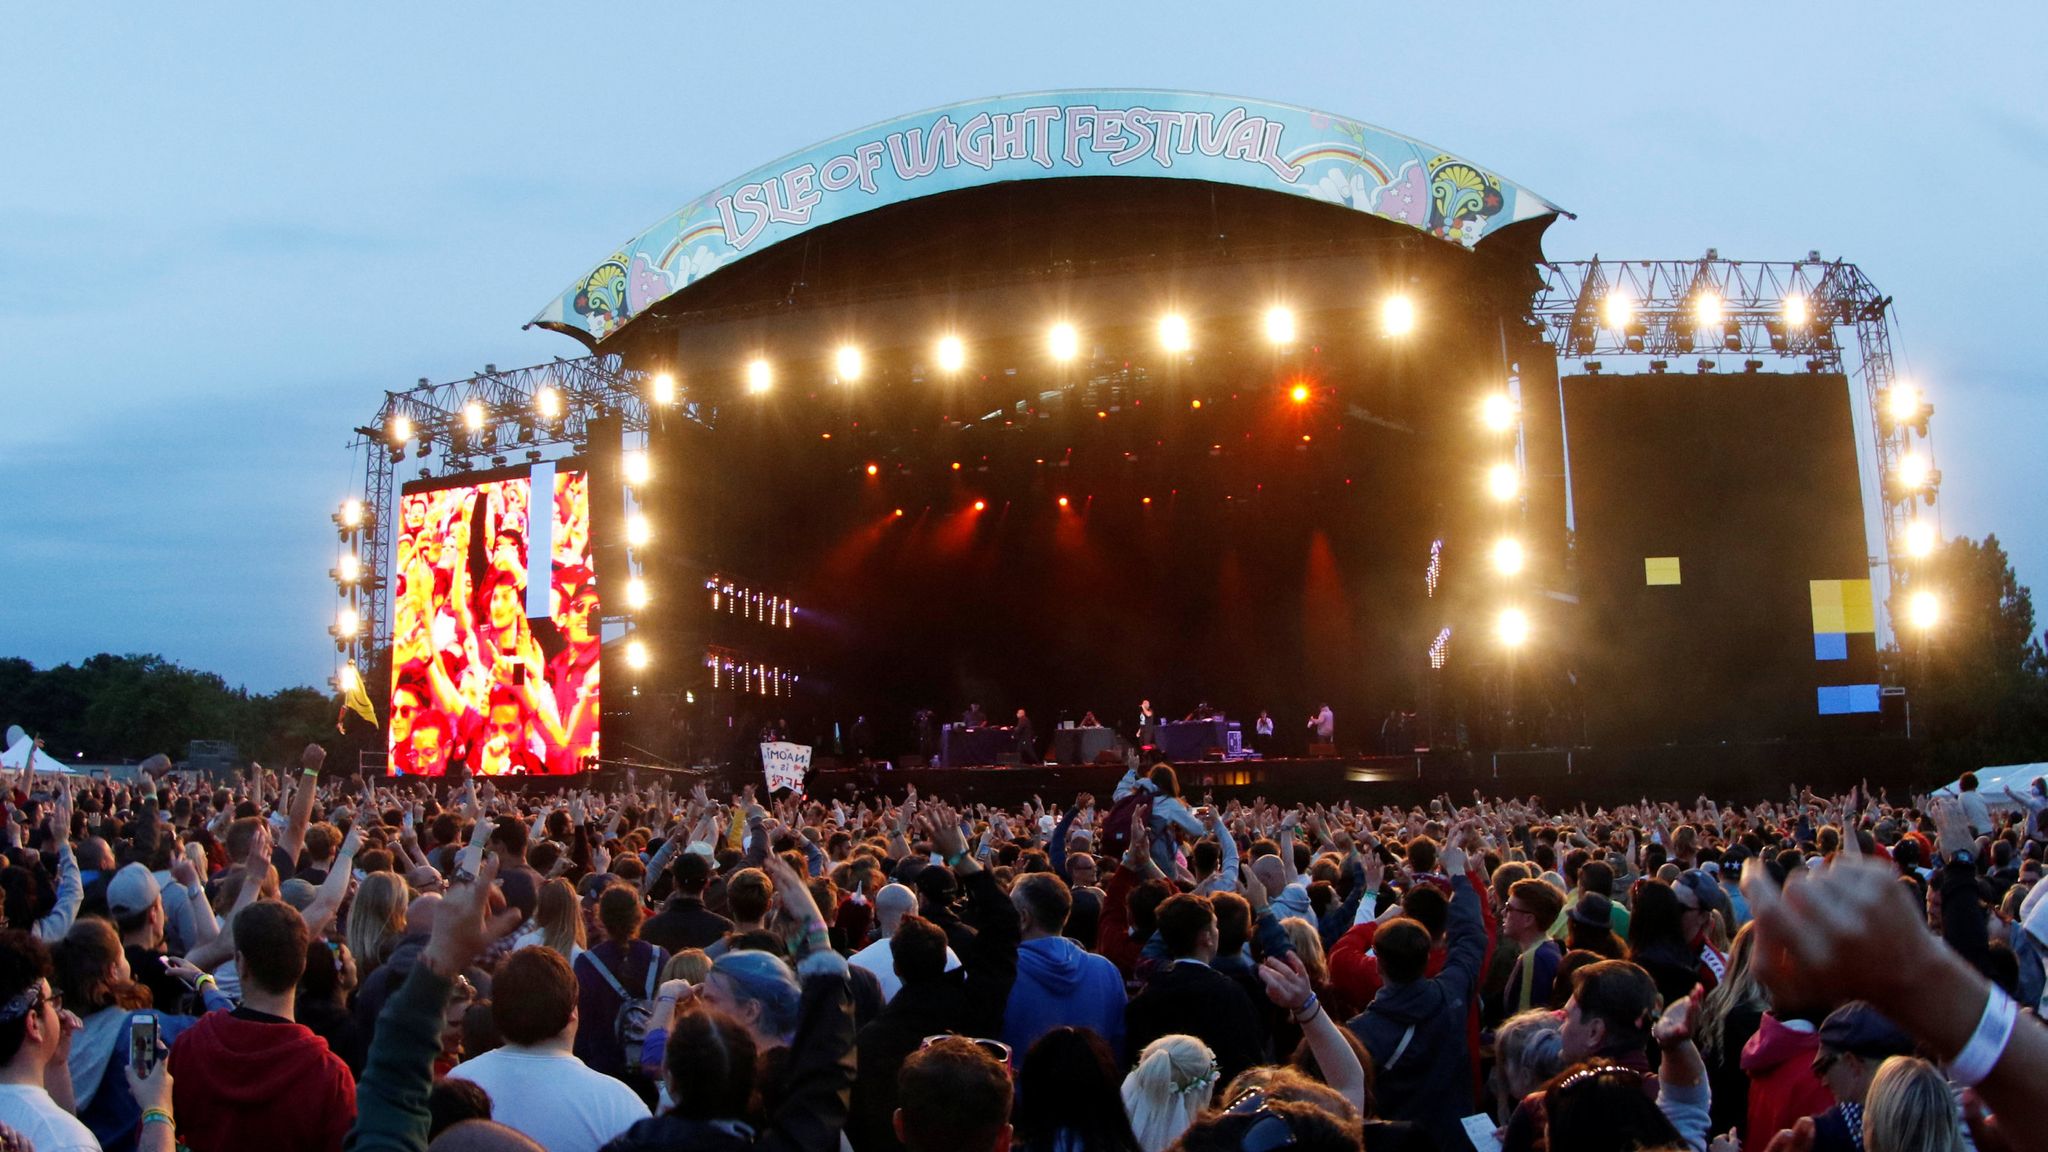 Isle of Wight Festival in pictures Ents Arts News Sky News